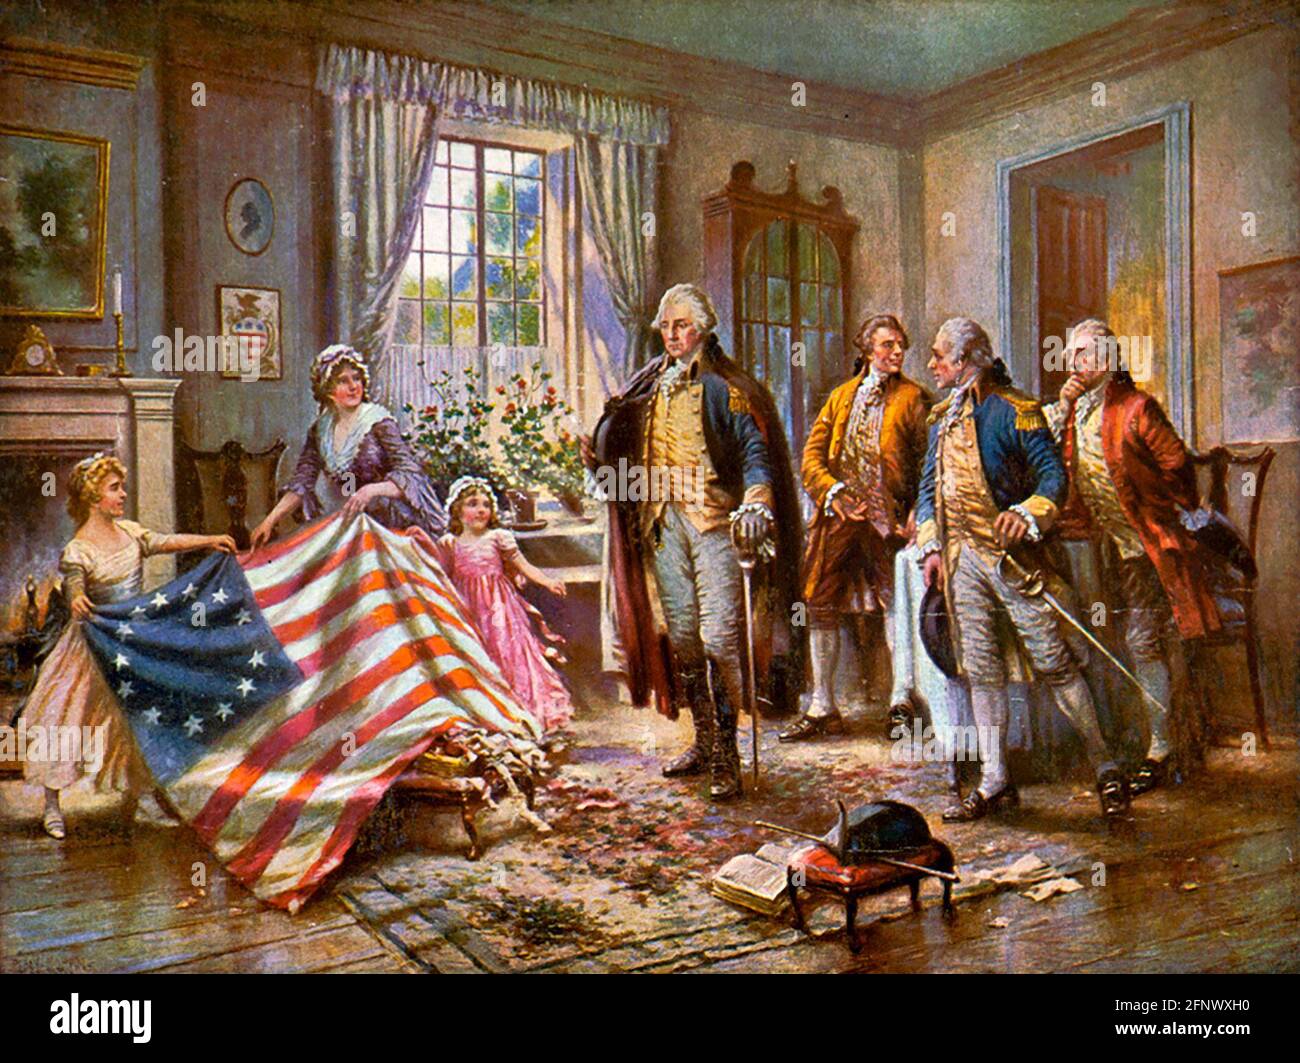 Betsy Ross Flagge. The Birth of Old Glory von Pery Moran, 1917. George Washington und andere Beamte sehen zu, als Betsy Ross ihre Flagge zeigt. Stockfoto